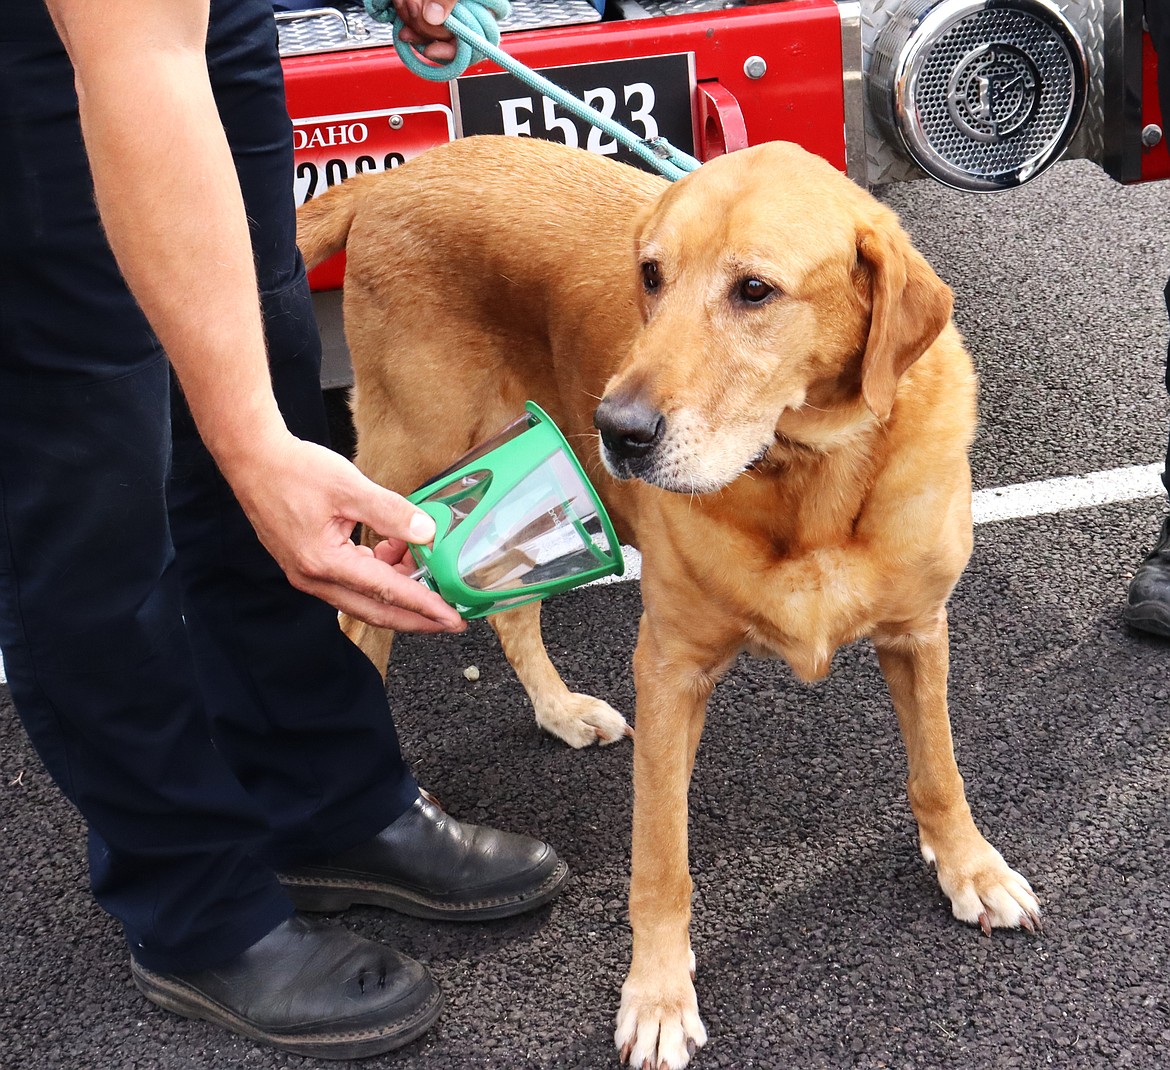 Larry, a dog up for adoption at Companions Animal Center, on Tuesday looks at one of the 20 PureVent Pet oxygen masks for first responders, which will be placed
on fire engines throughout Kootenai County.